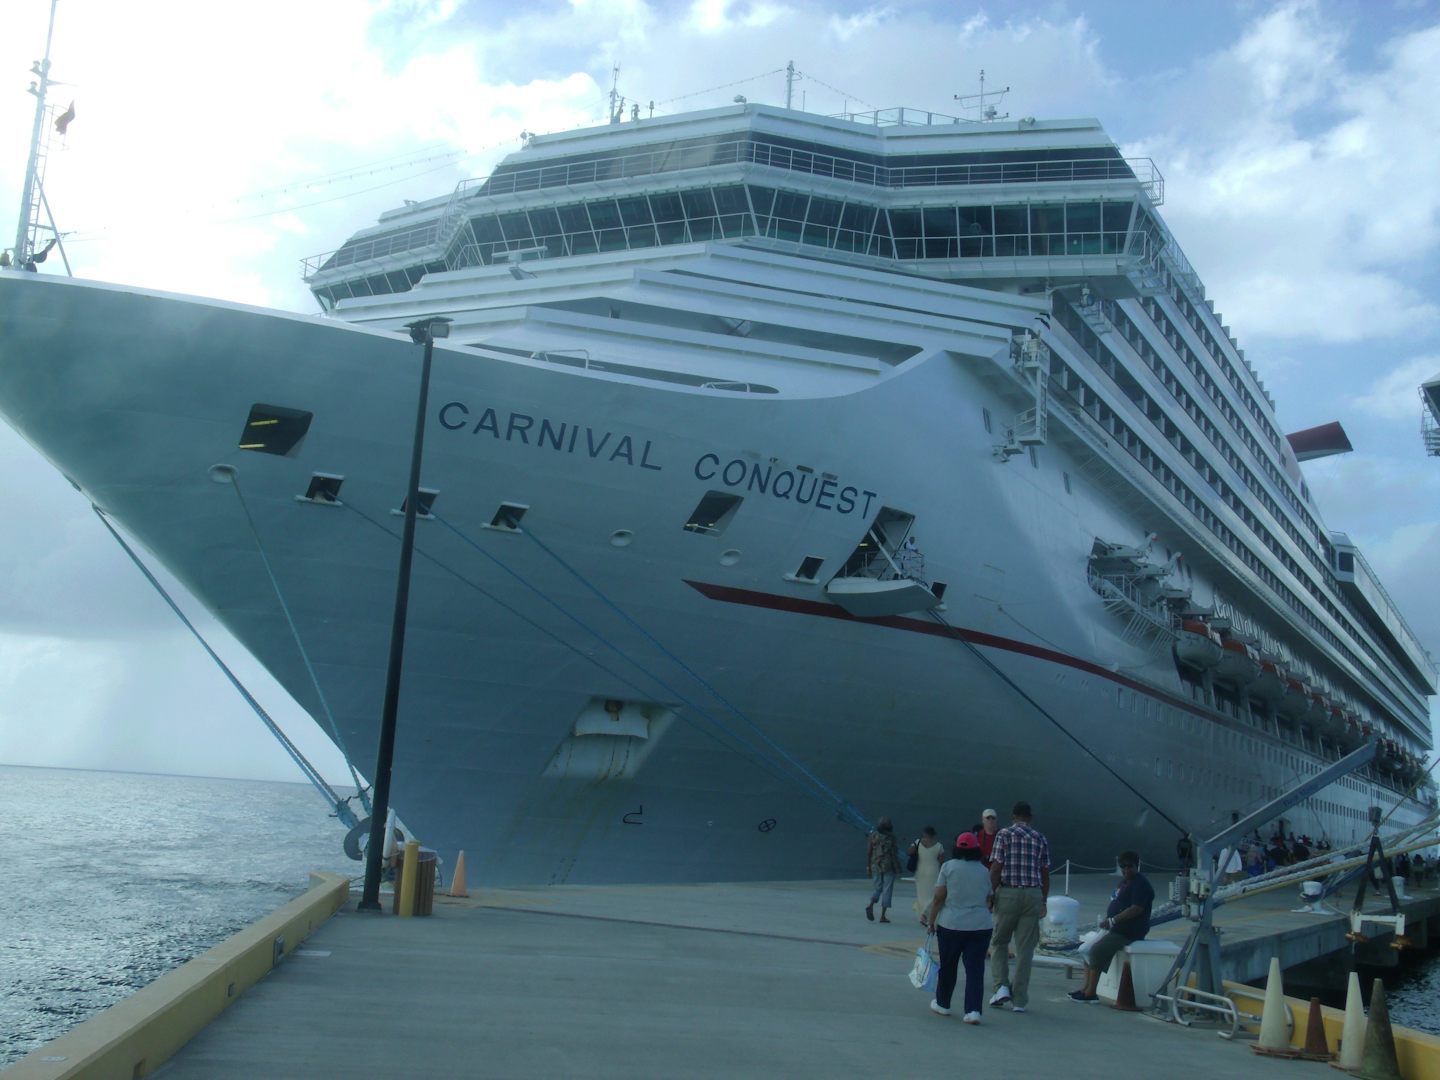 The wonderful Carnival Conquest!